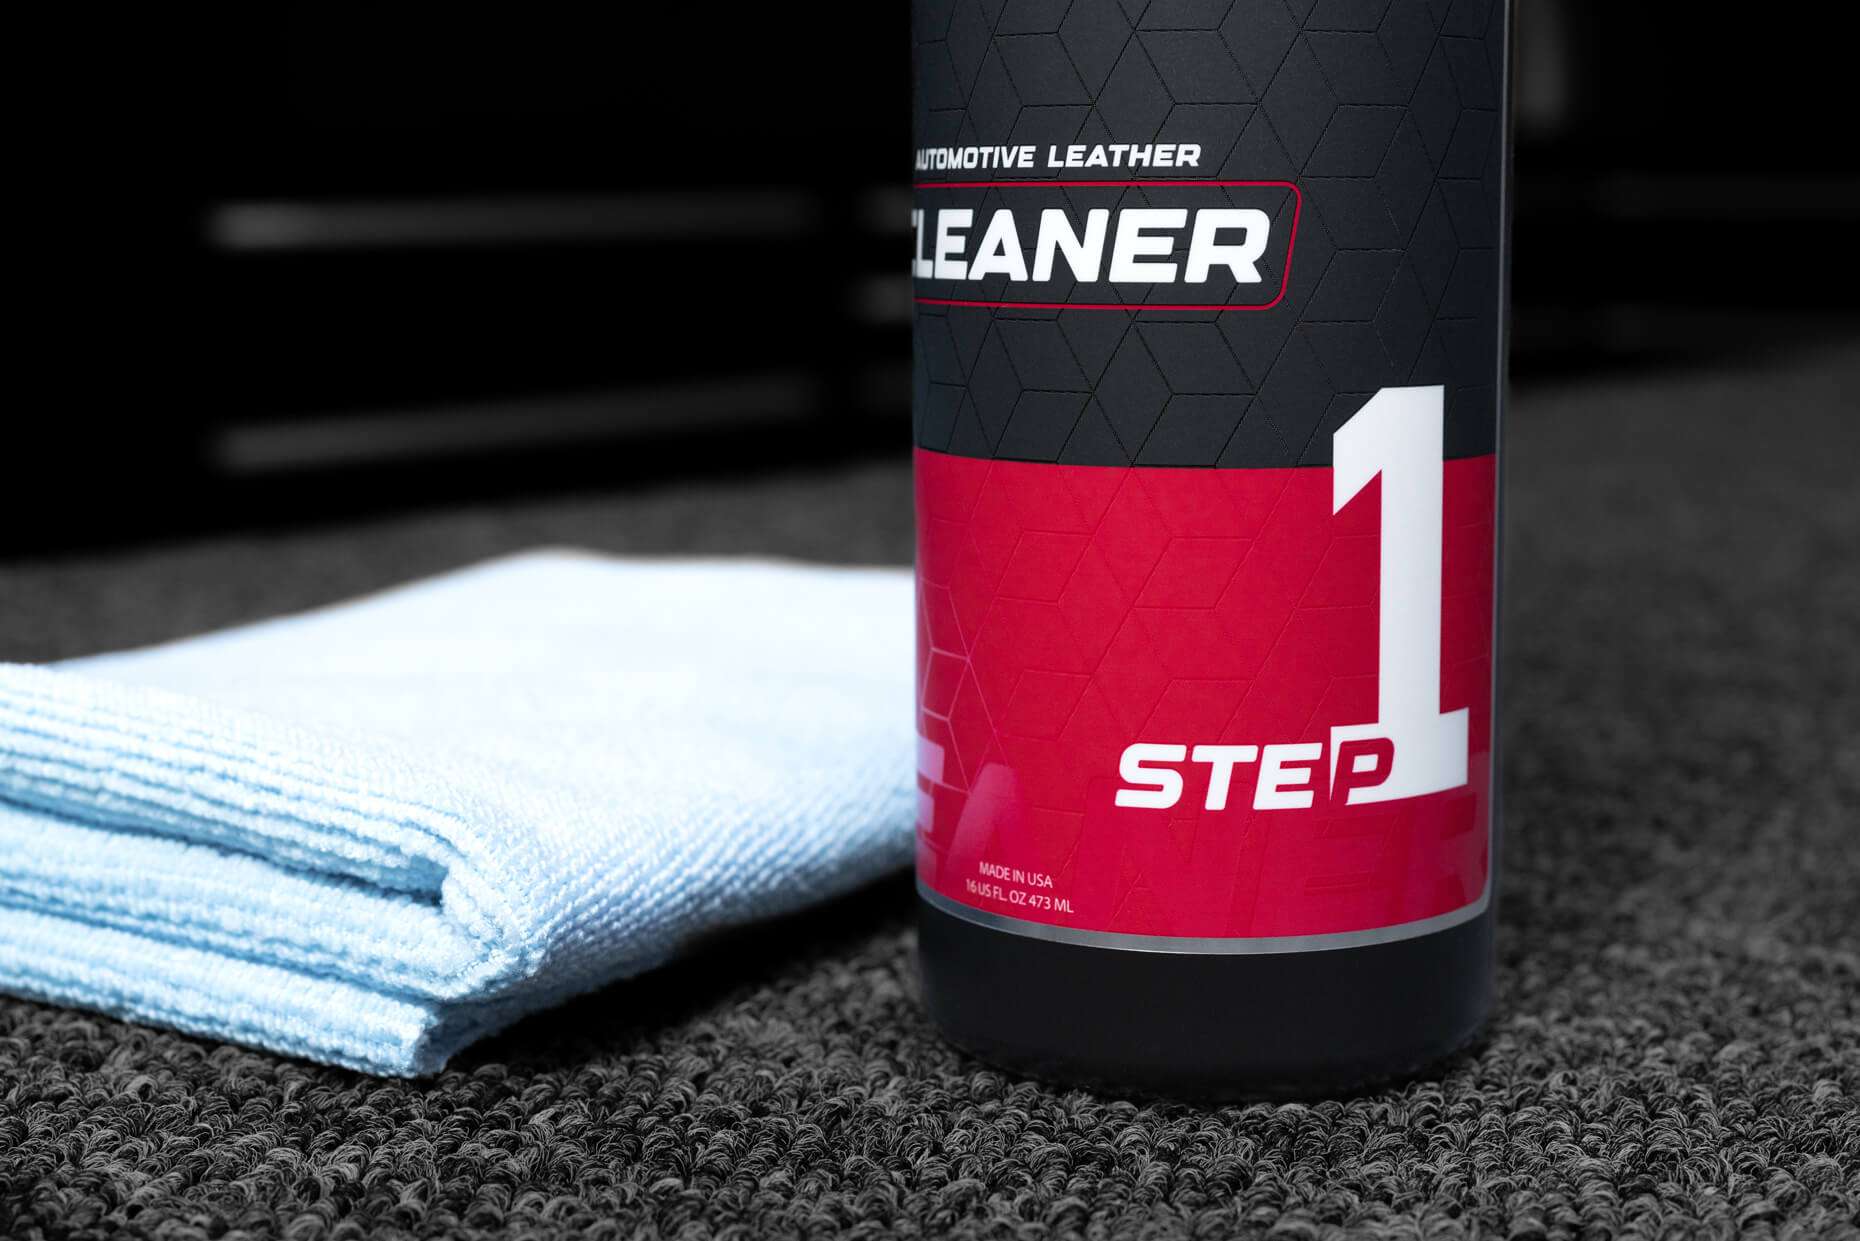 16oz bottle of Sanctum automotive leather cleaner with microfiber towel - close view of Step 1